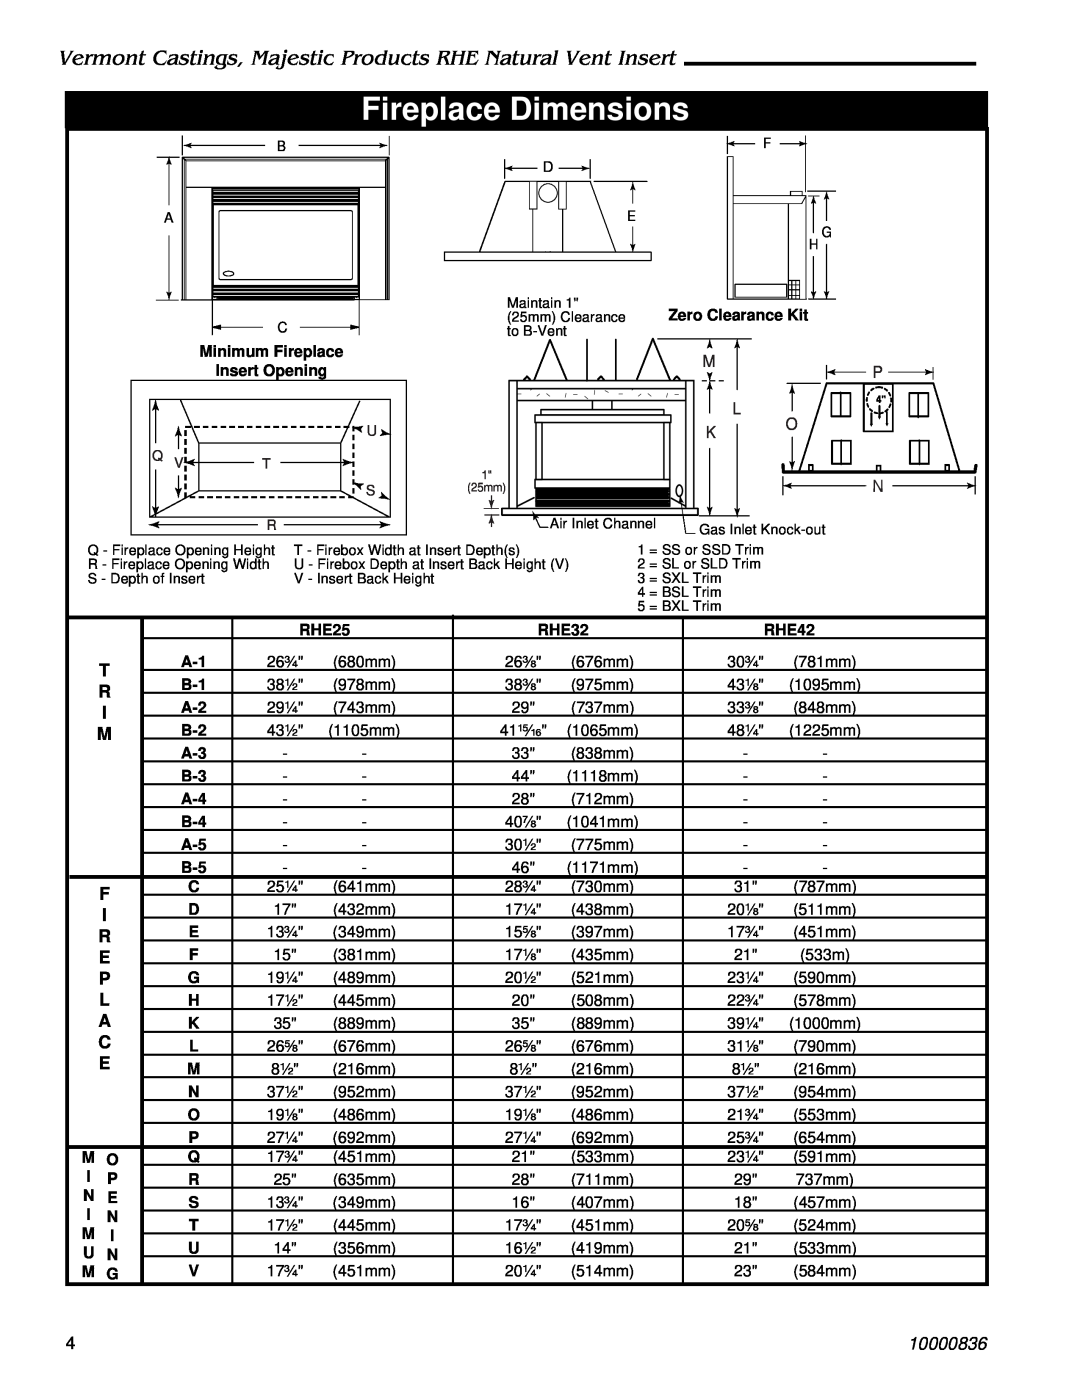 Vermont Casting RHE25, RHE42, RHE32 installation instructions Fireplace Dimensions, M L K O, 10000836 